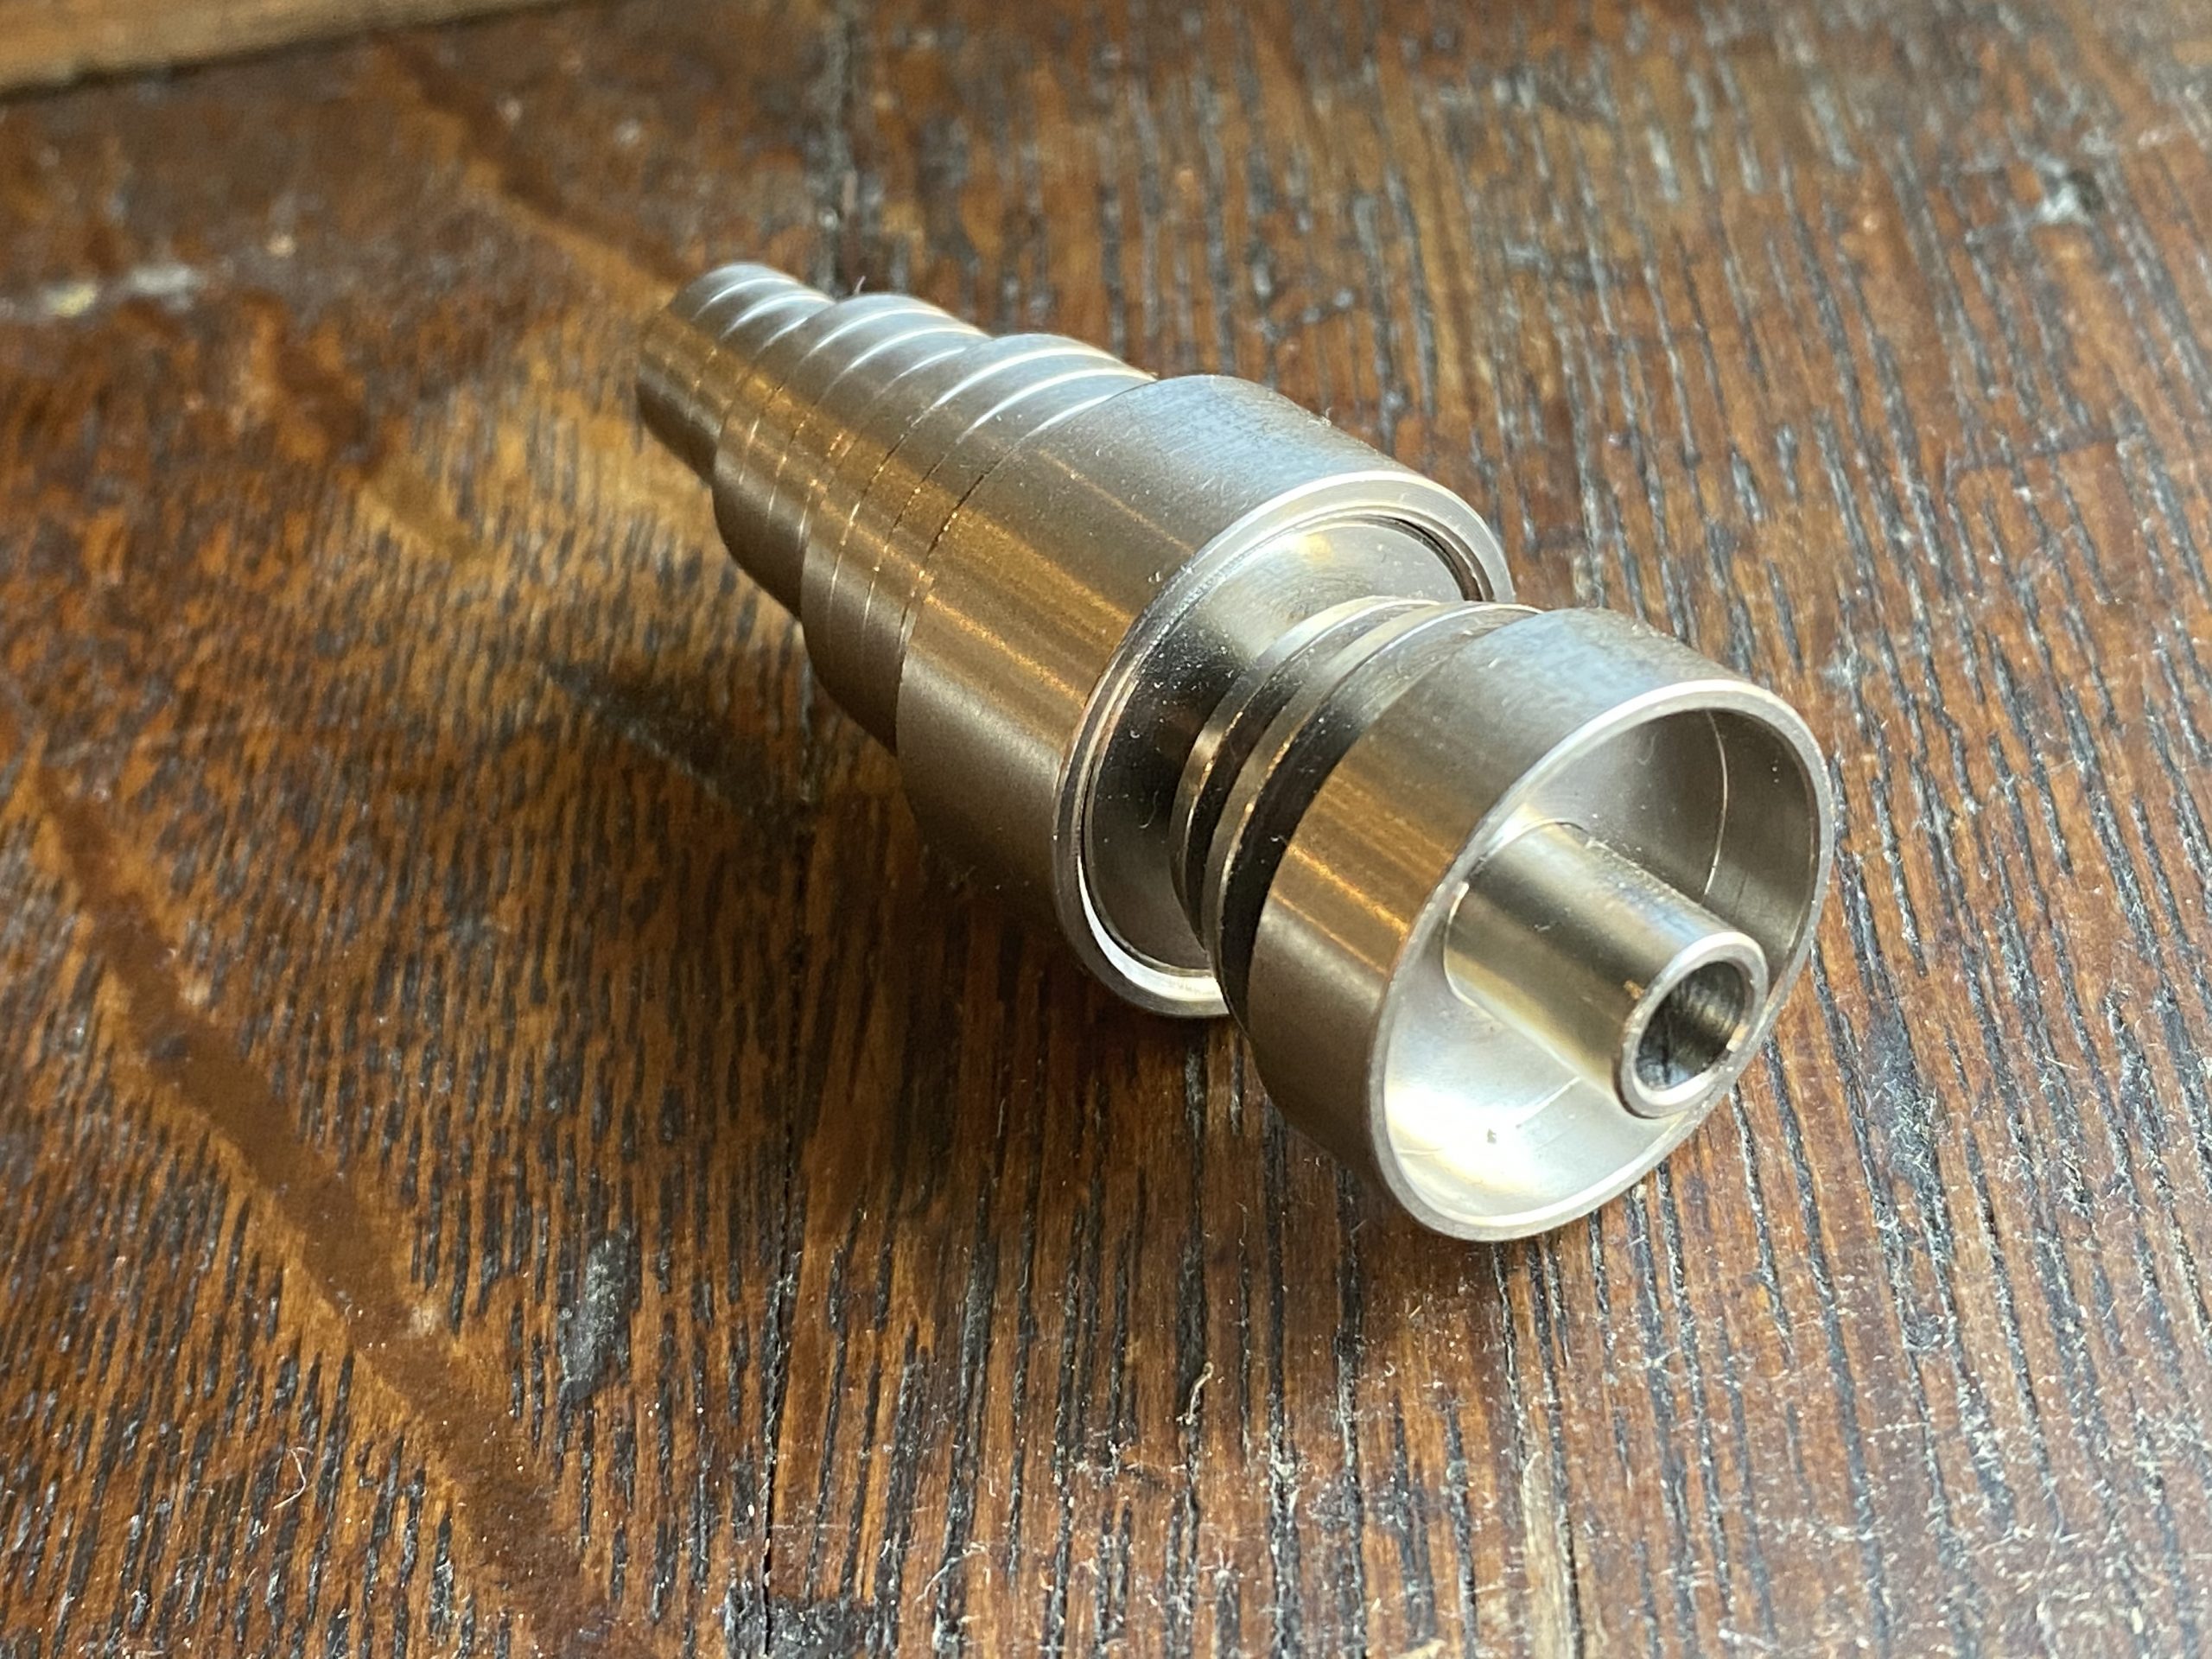 10mm Nectar Collector with Titanium Nail and Quartz Attachments